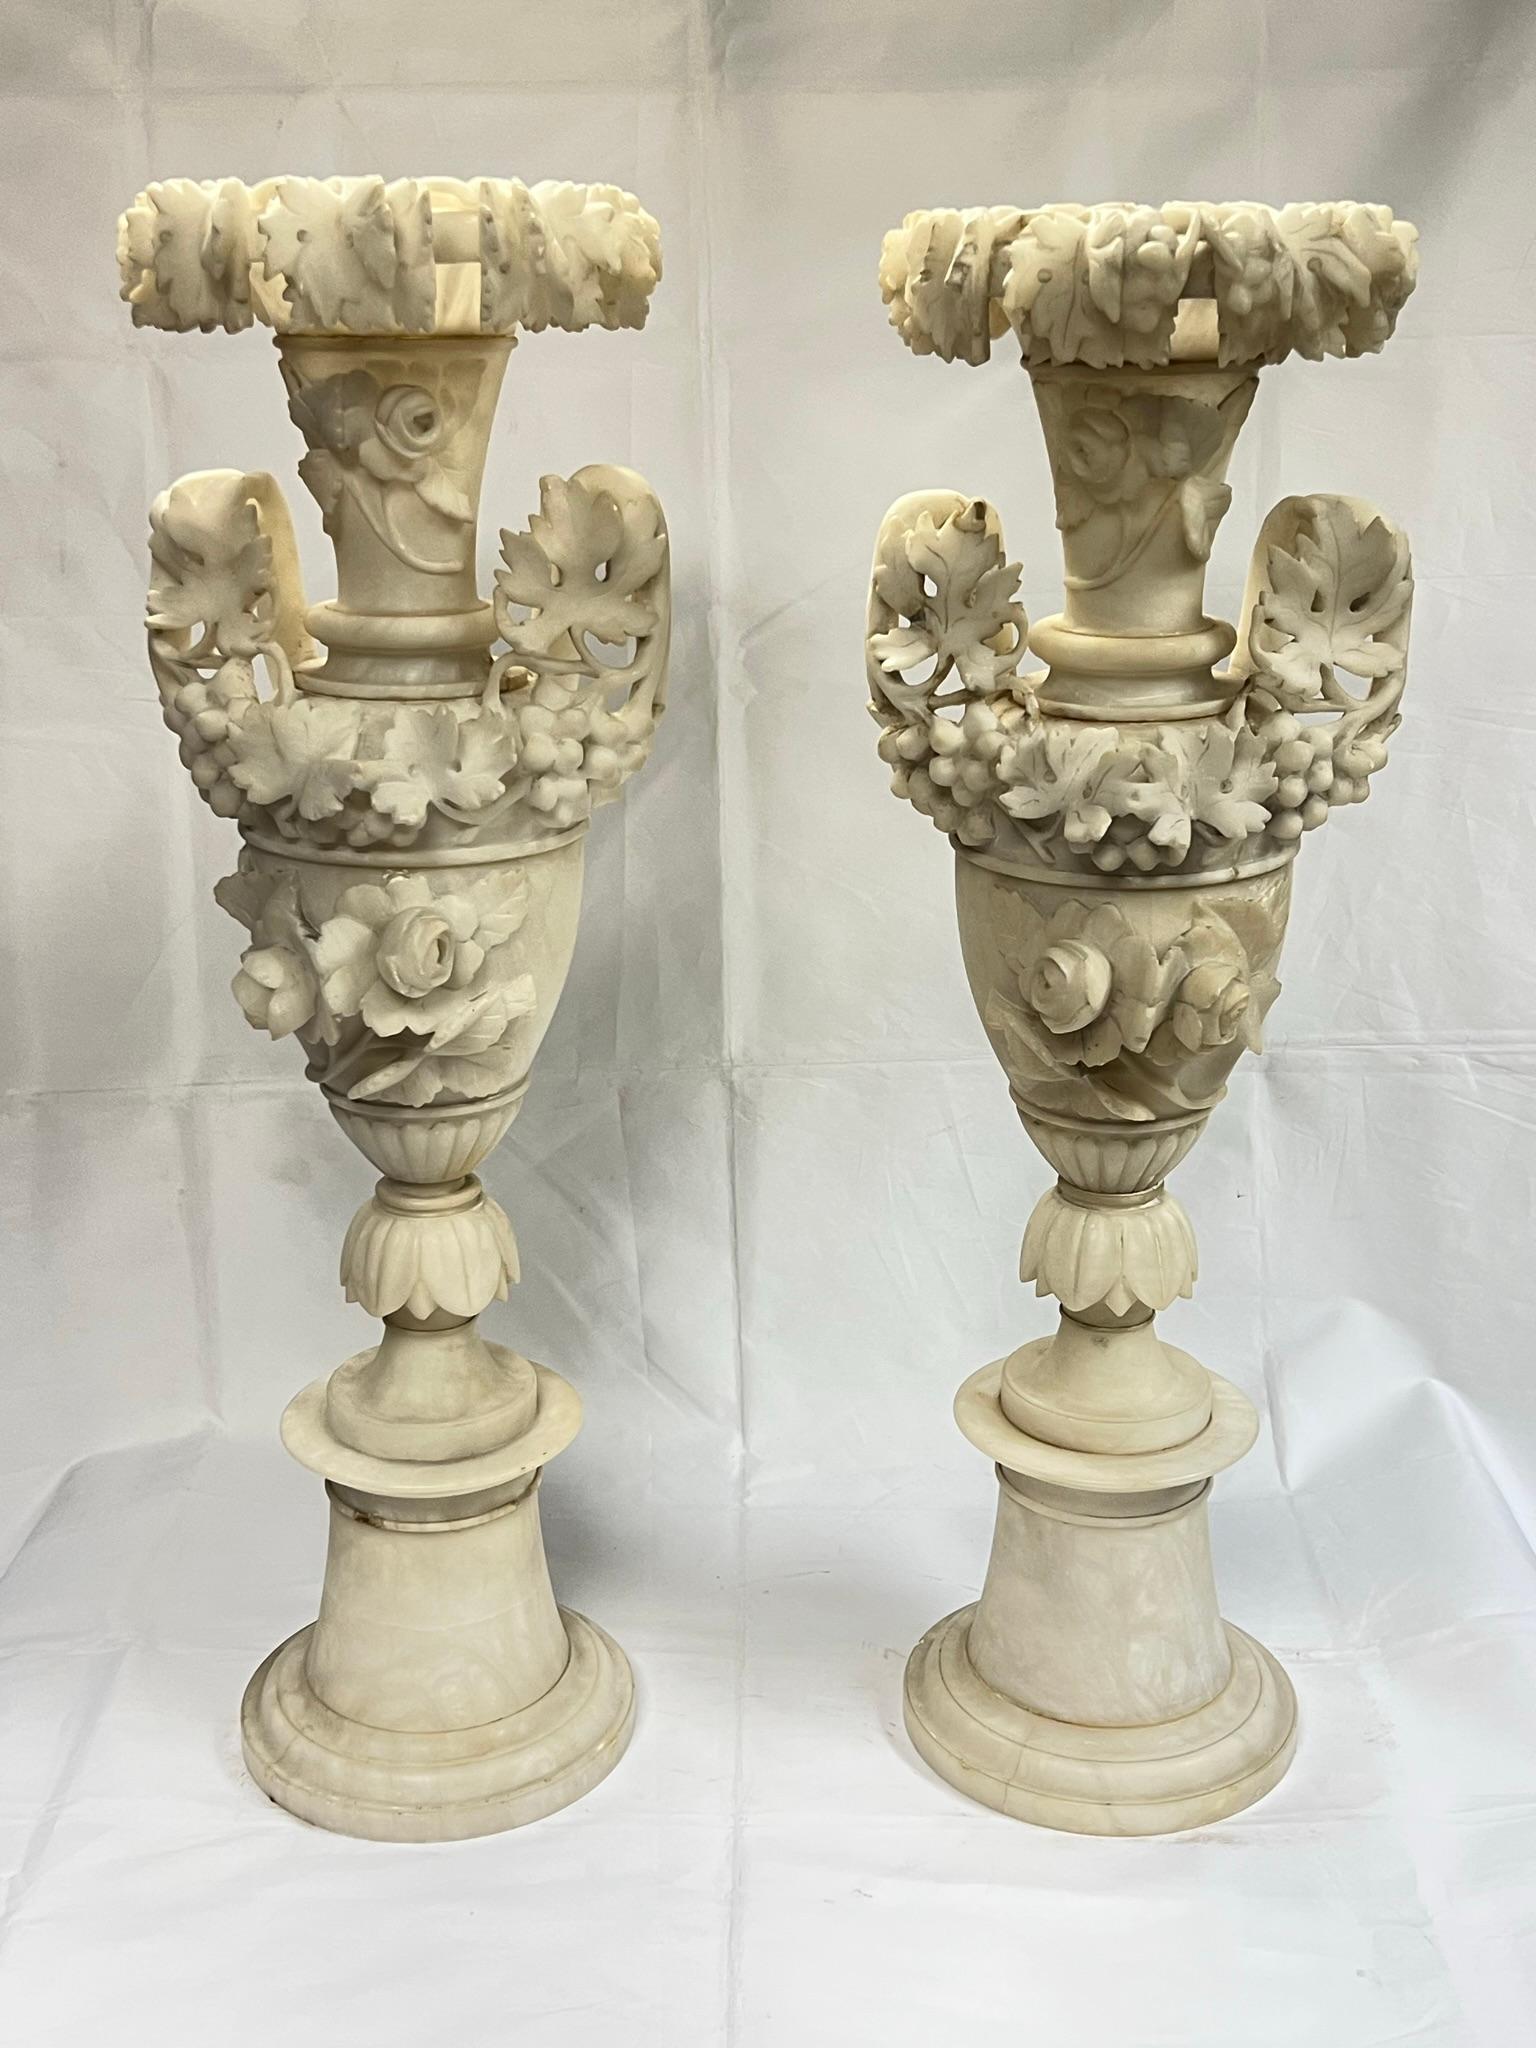 Pair of very large and very finley hand carved 19 century Italian alabaster  vases with roses and floral swags carved in high relief.  Previously drilled for use as table lamps.  